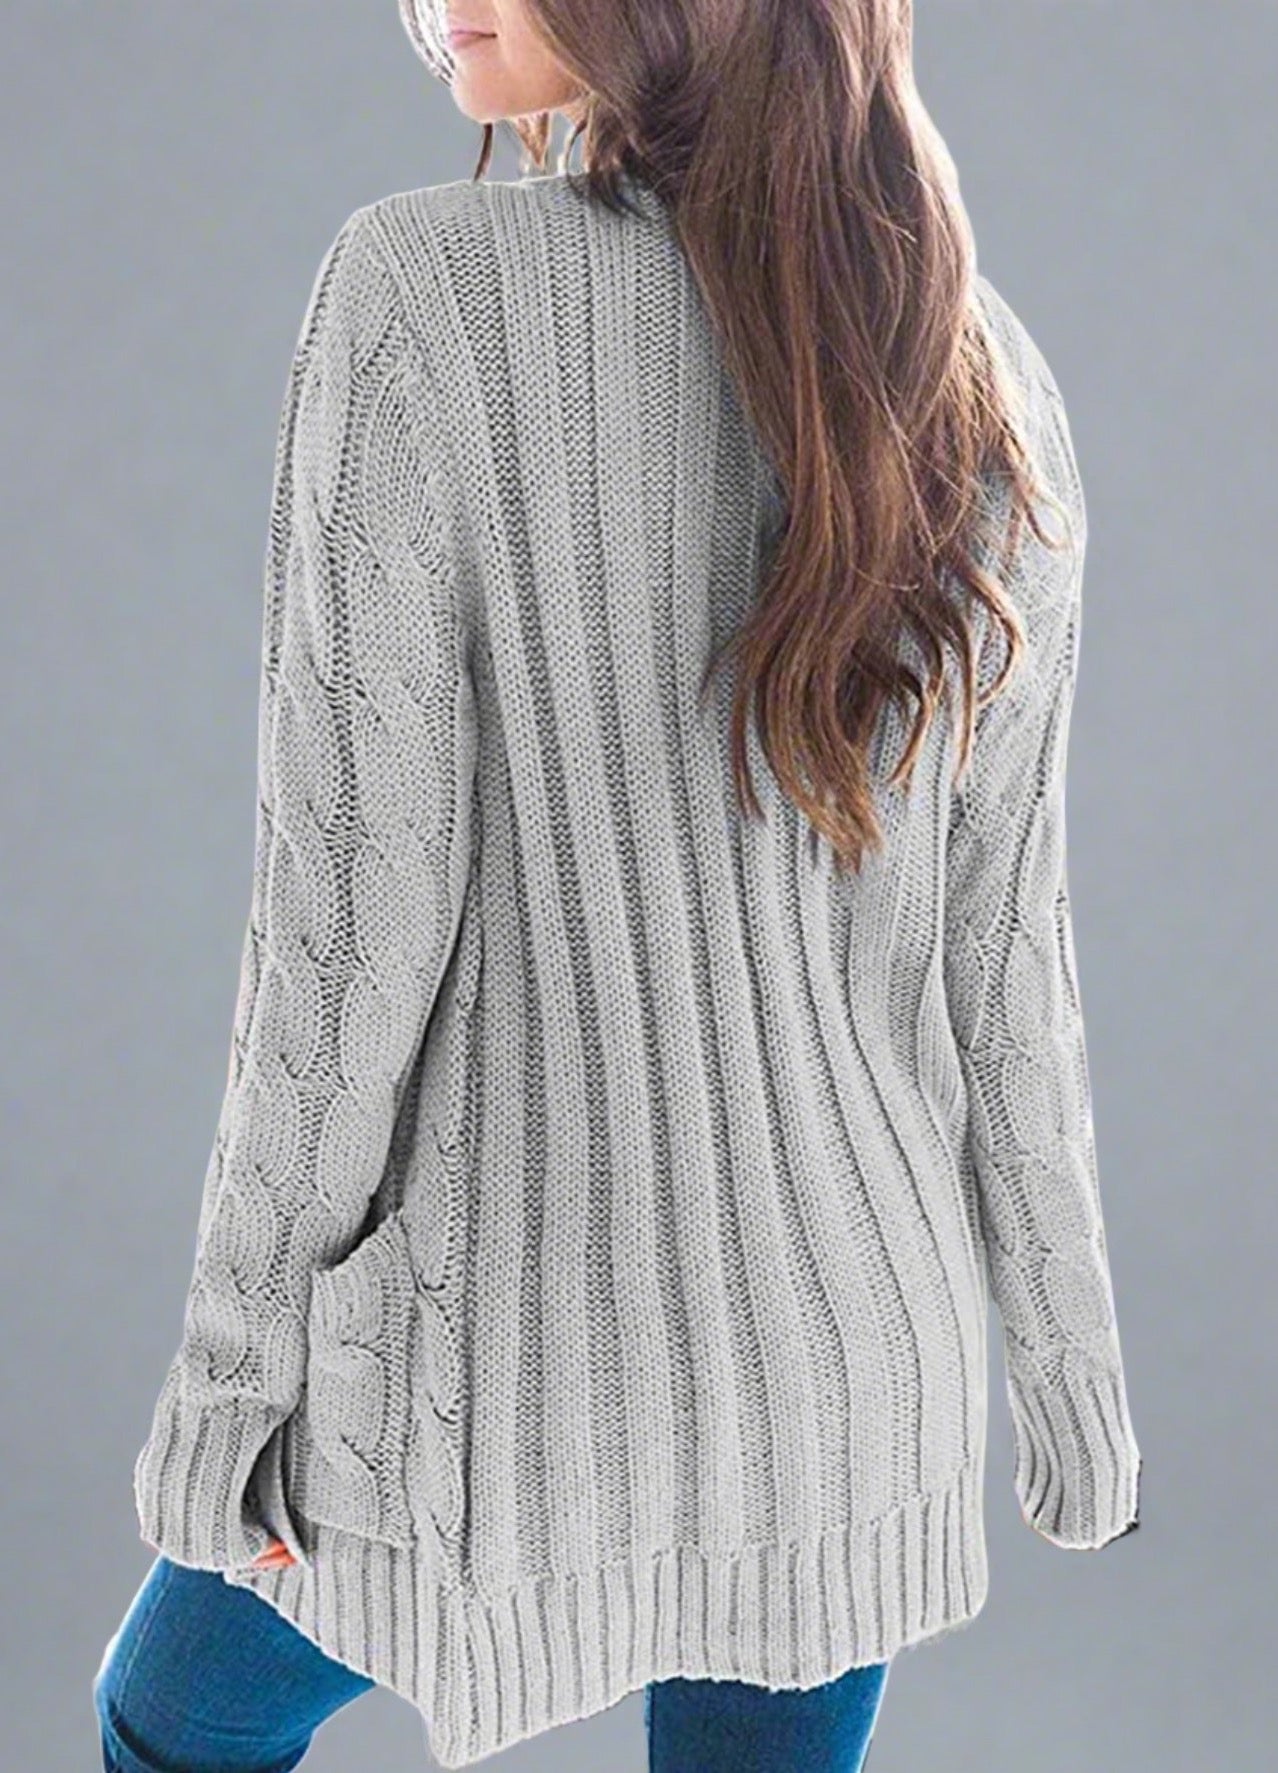 Cozy Cable Knit Cardigan - gray, classic cable knit design, long sleeves, button-down front, front pockets, soft high-quality fabric, perfect for casual outings and layering.